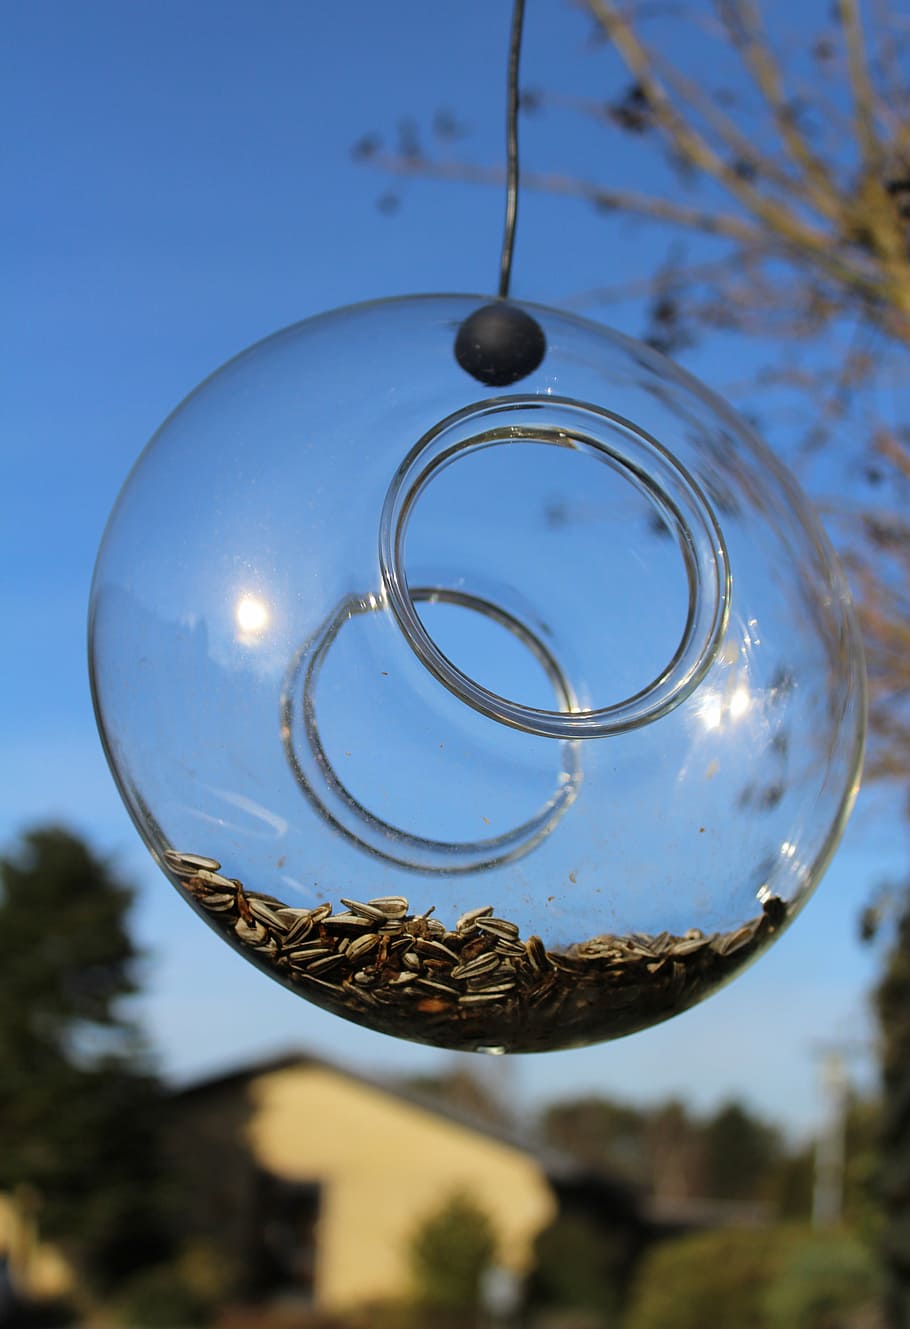 feeder, feed bullet, bird food, tree, focus on foreground, sky, nature, sphere, close-up, reflection